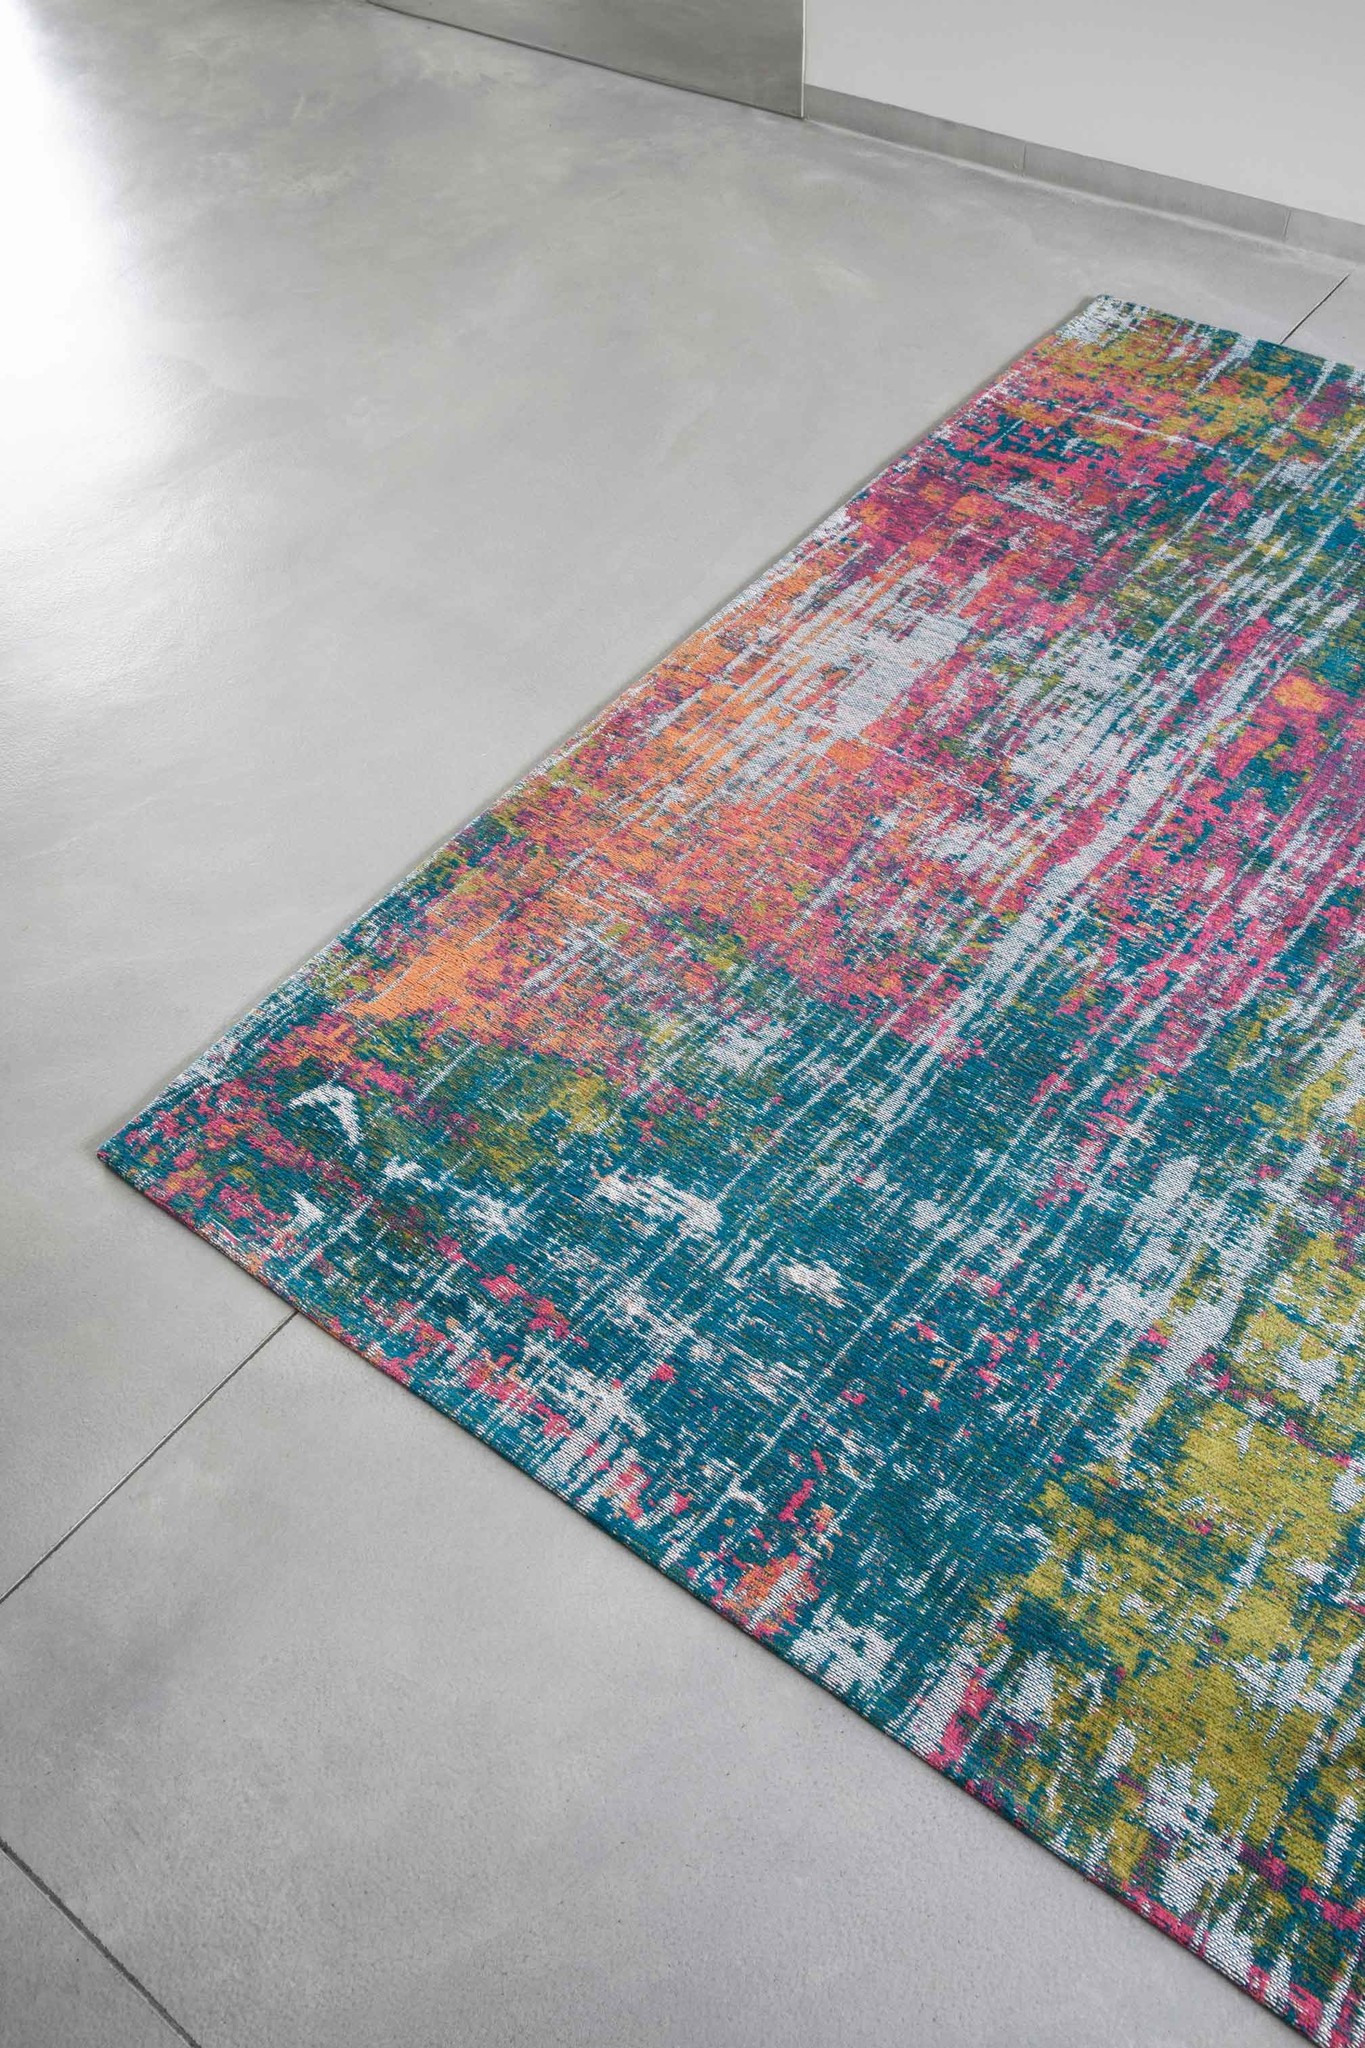 Abstract Multi Flatwoven Rug ☞ Size: 2' 7" x 5' (80 x 150 cm)